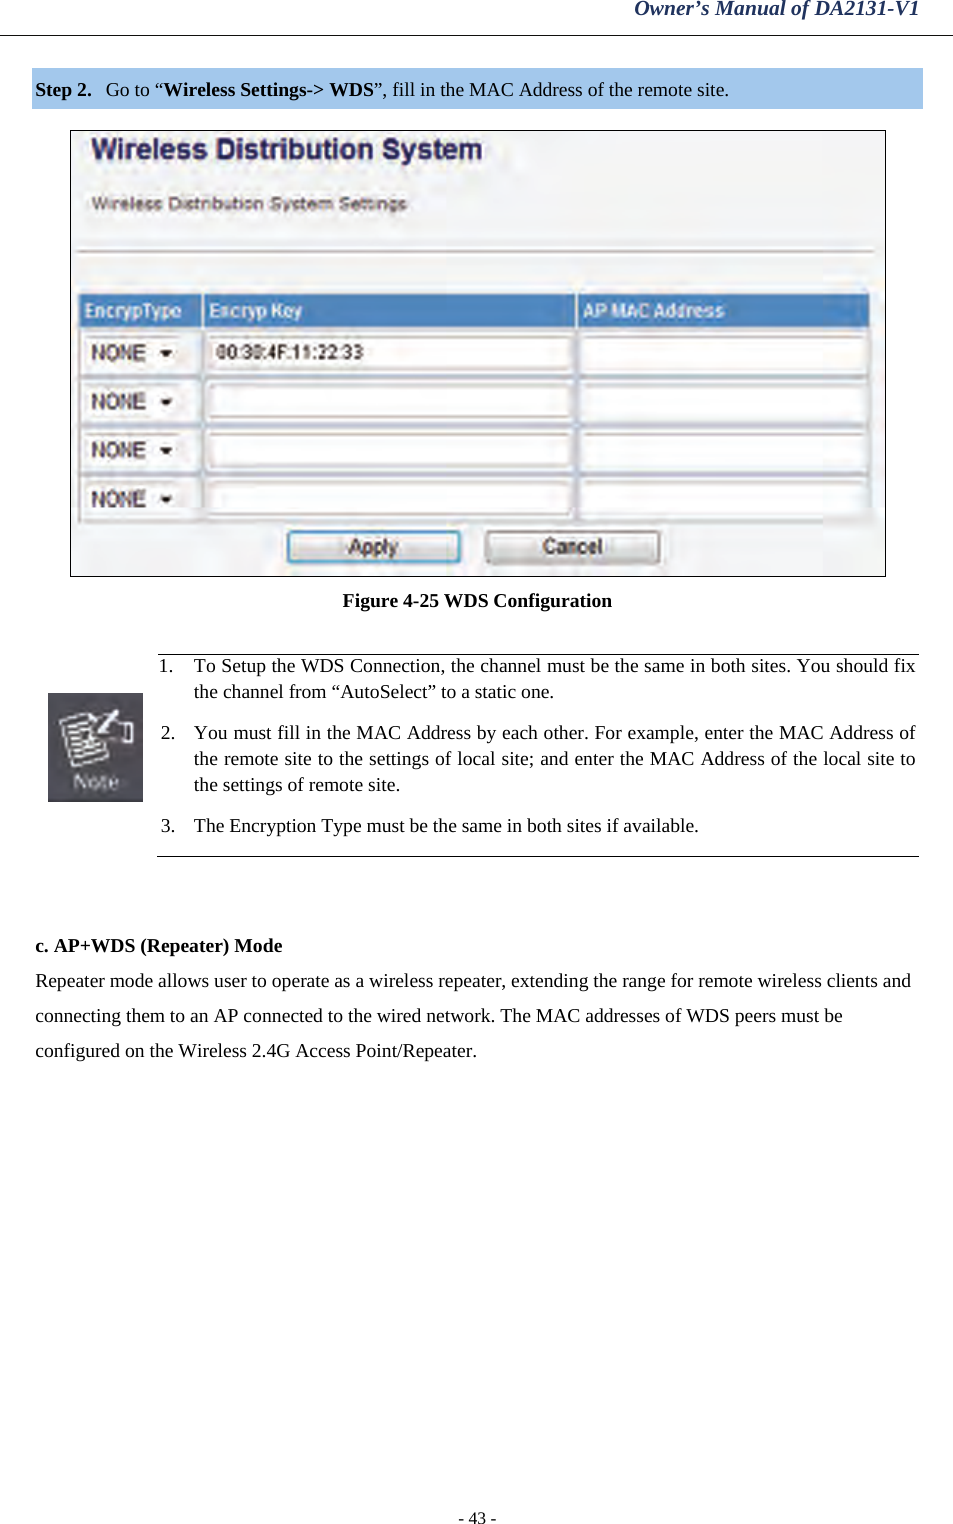 Owner’s Manual of DA2131-V1 - 43 - Step 2. Go to “Wireless Settings-&gt; WDS”, fill in the MAC Address of the remote site.   Figure 4-25 WDS Configuration   1. To Setup the WDS Connection, the channel must be the same in both sites. You should fix the channel from “AutoSelect” to a static one. 2. You must fill in the MAC Address by each other. For example, enter the MAC Address of the remote site to the settings of local site; and enter the MAC Address of the local site to the settings of remote site. 3. The Encryption Type must be the same in both sites if available.   c. AP+WDS (Repeater) Mode Repeater mode allows user to operate as a wireless repeater, extending the range for remote wireless clients and connecting them to an AP connected to the wired network. The MAC addresses of WDS peers must be configured on the Wireless 2.4G Access Point/Repeater. 